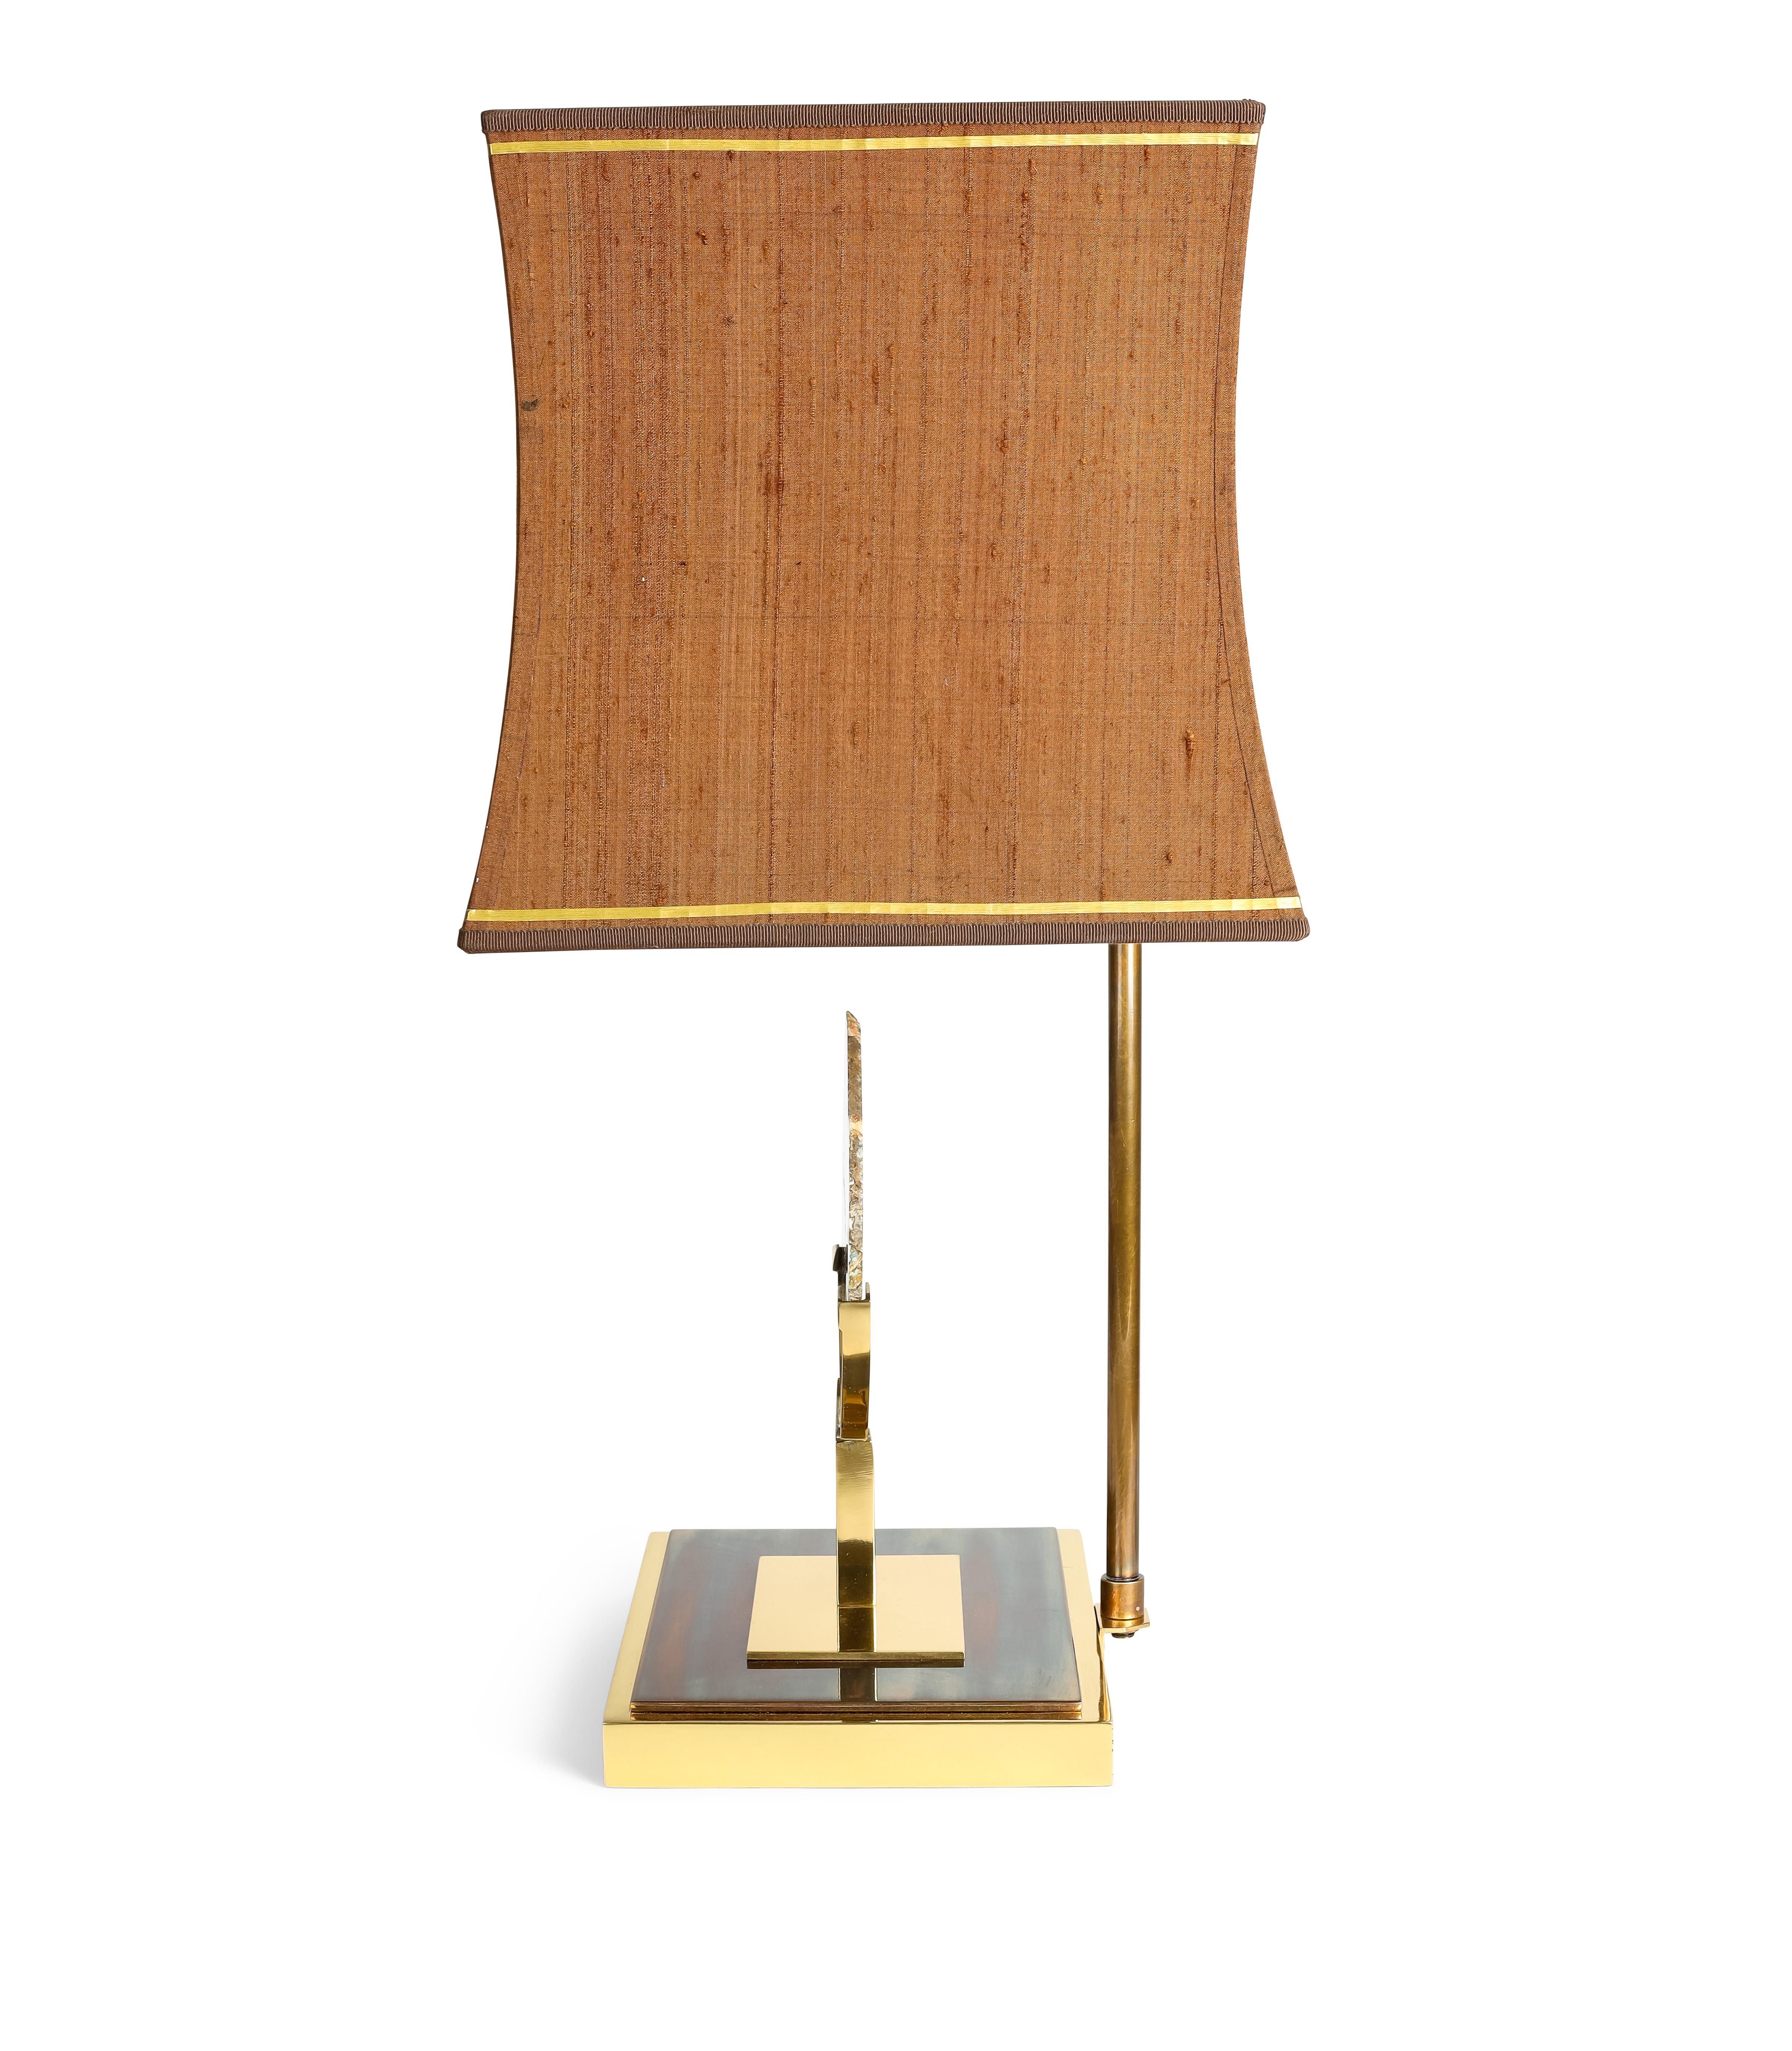 This lamp is in brass with a 2 tone base. It has been professionally refinished. It holds an agate stone. The shade was hand made with a gold trim. The lamp has been American wired and has 2 lights.                                   Size of the